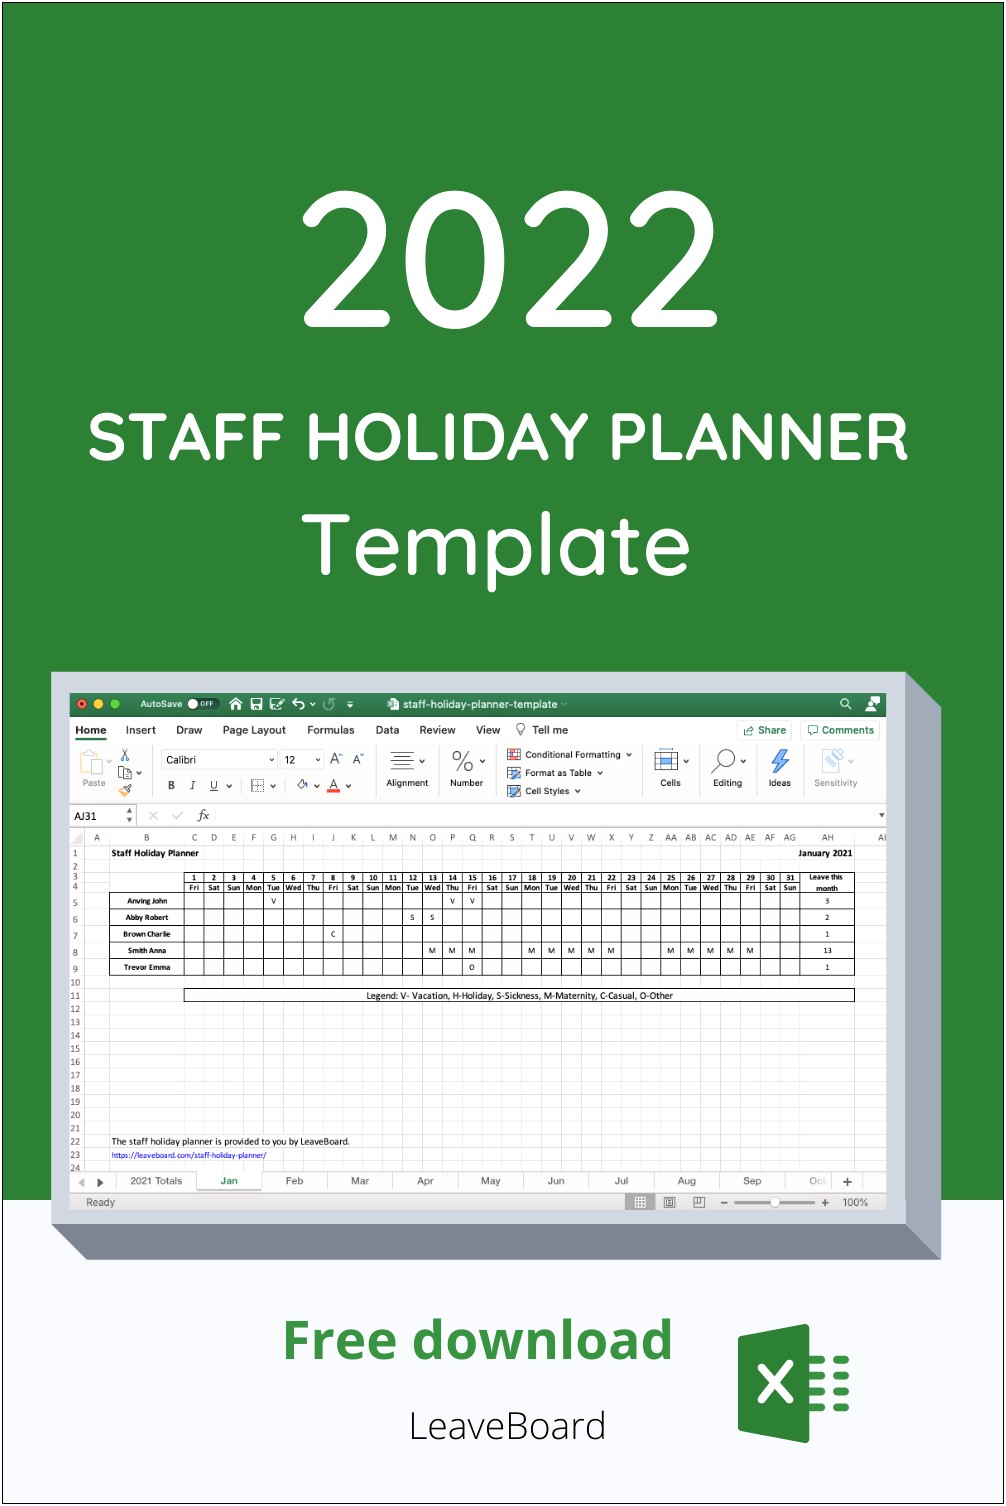 Staff Holiday Planner Template Free Excel 2017